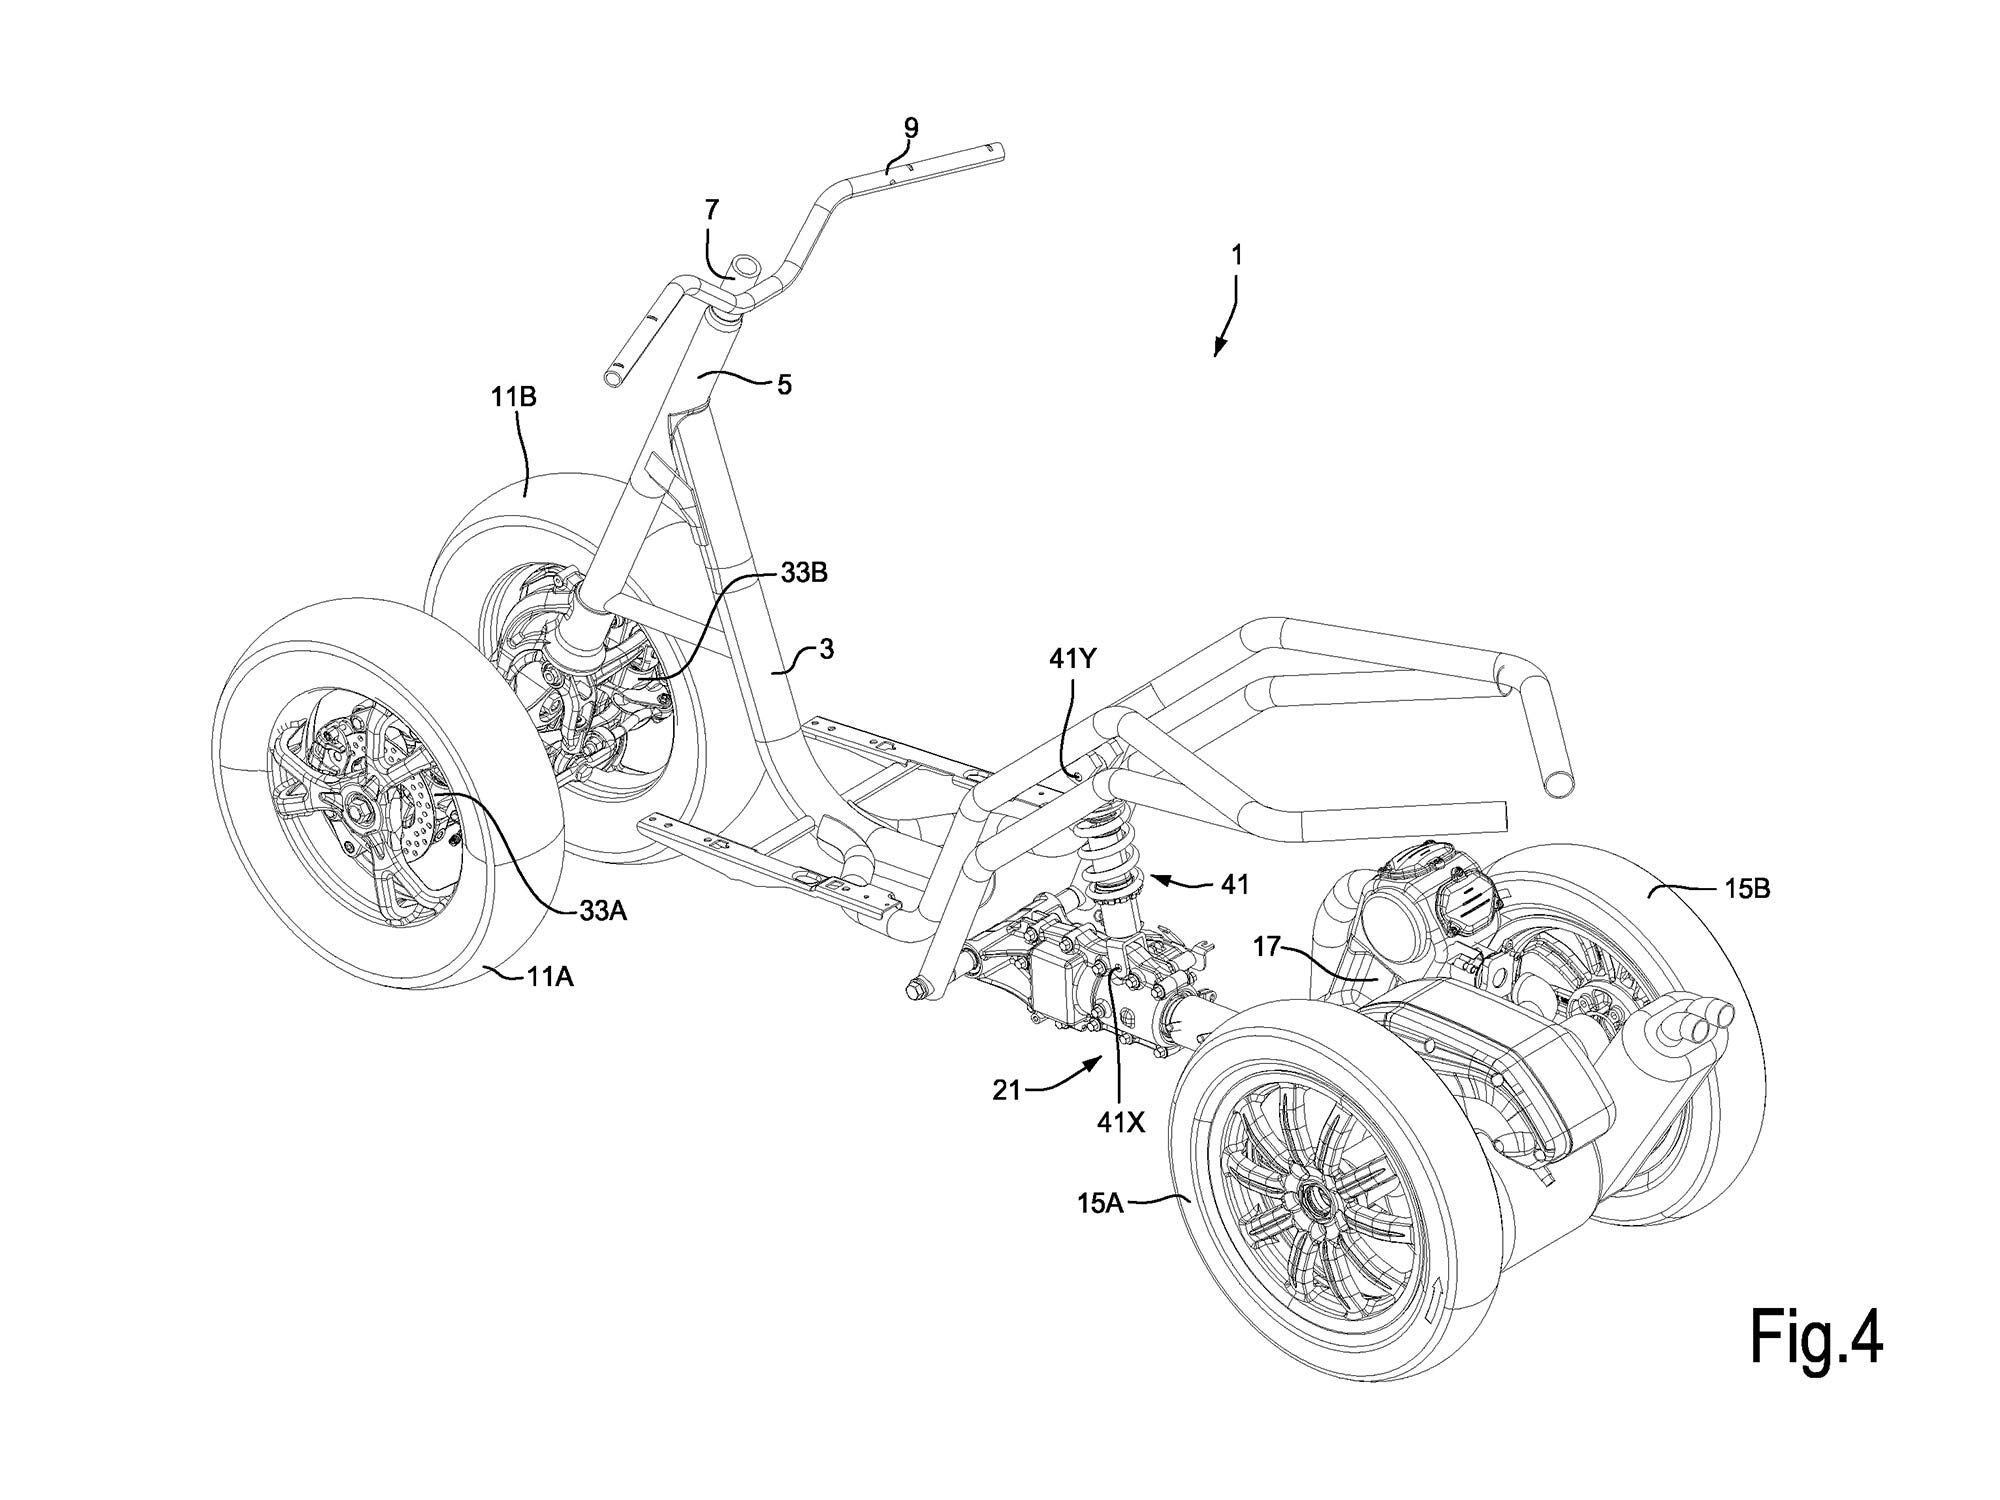 The Piaggio four-wheeler patents show how the vehicle uses elements from its MyMoover trike and other models to create this urban-delivery vehicle.